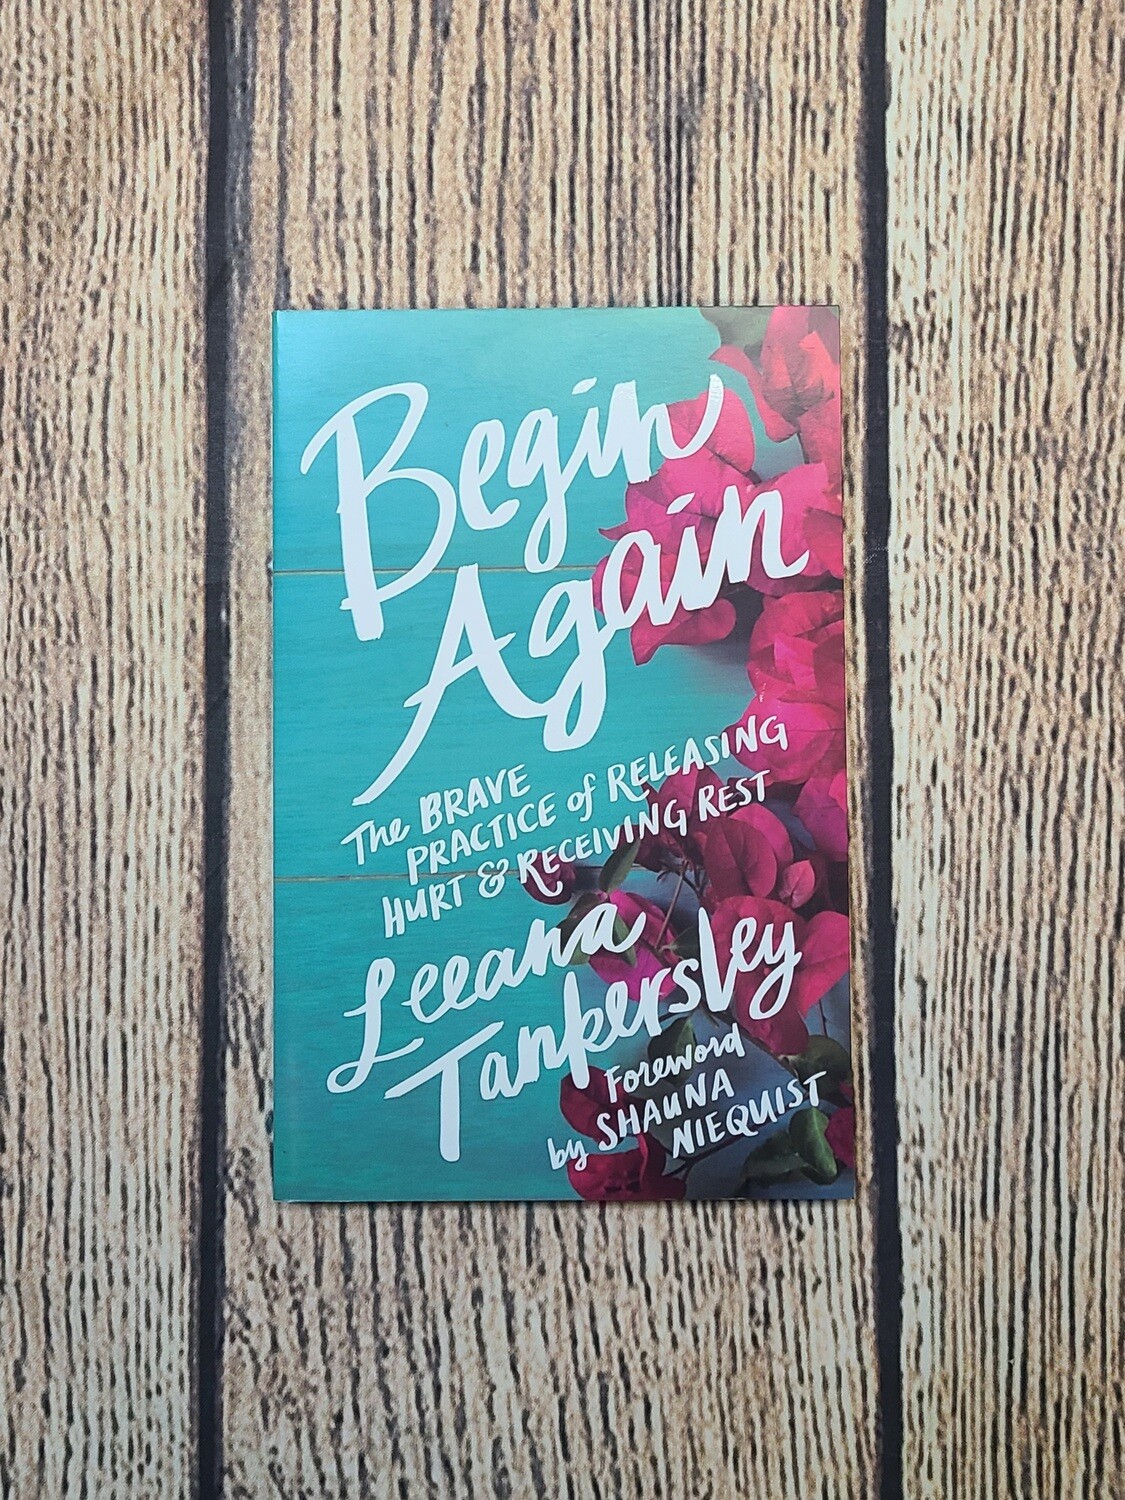 Begin Again: The Brace Practice of Releasing Hurt and Receiving Rest by Leeana Tankersley